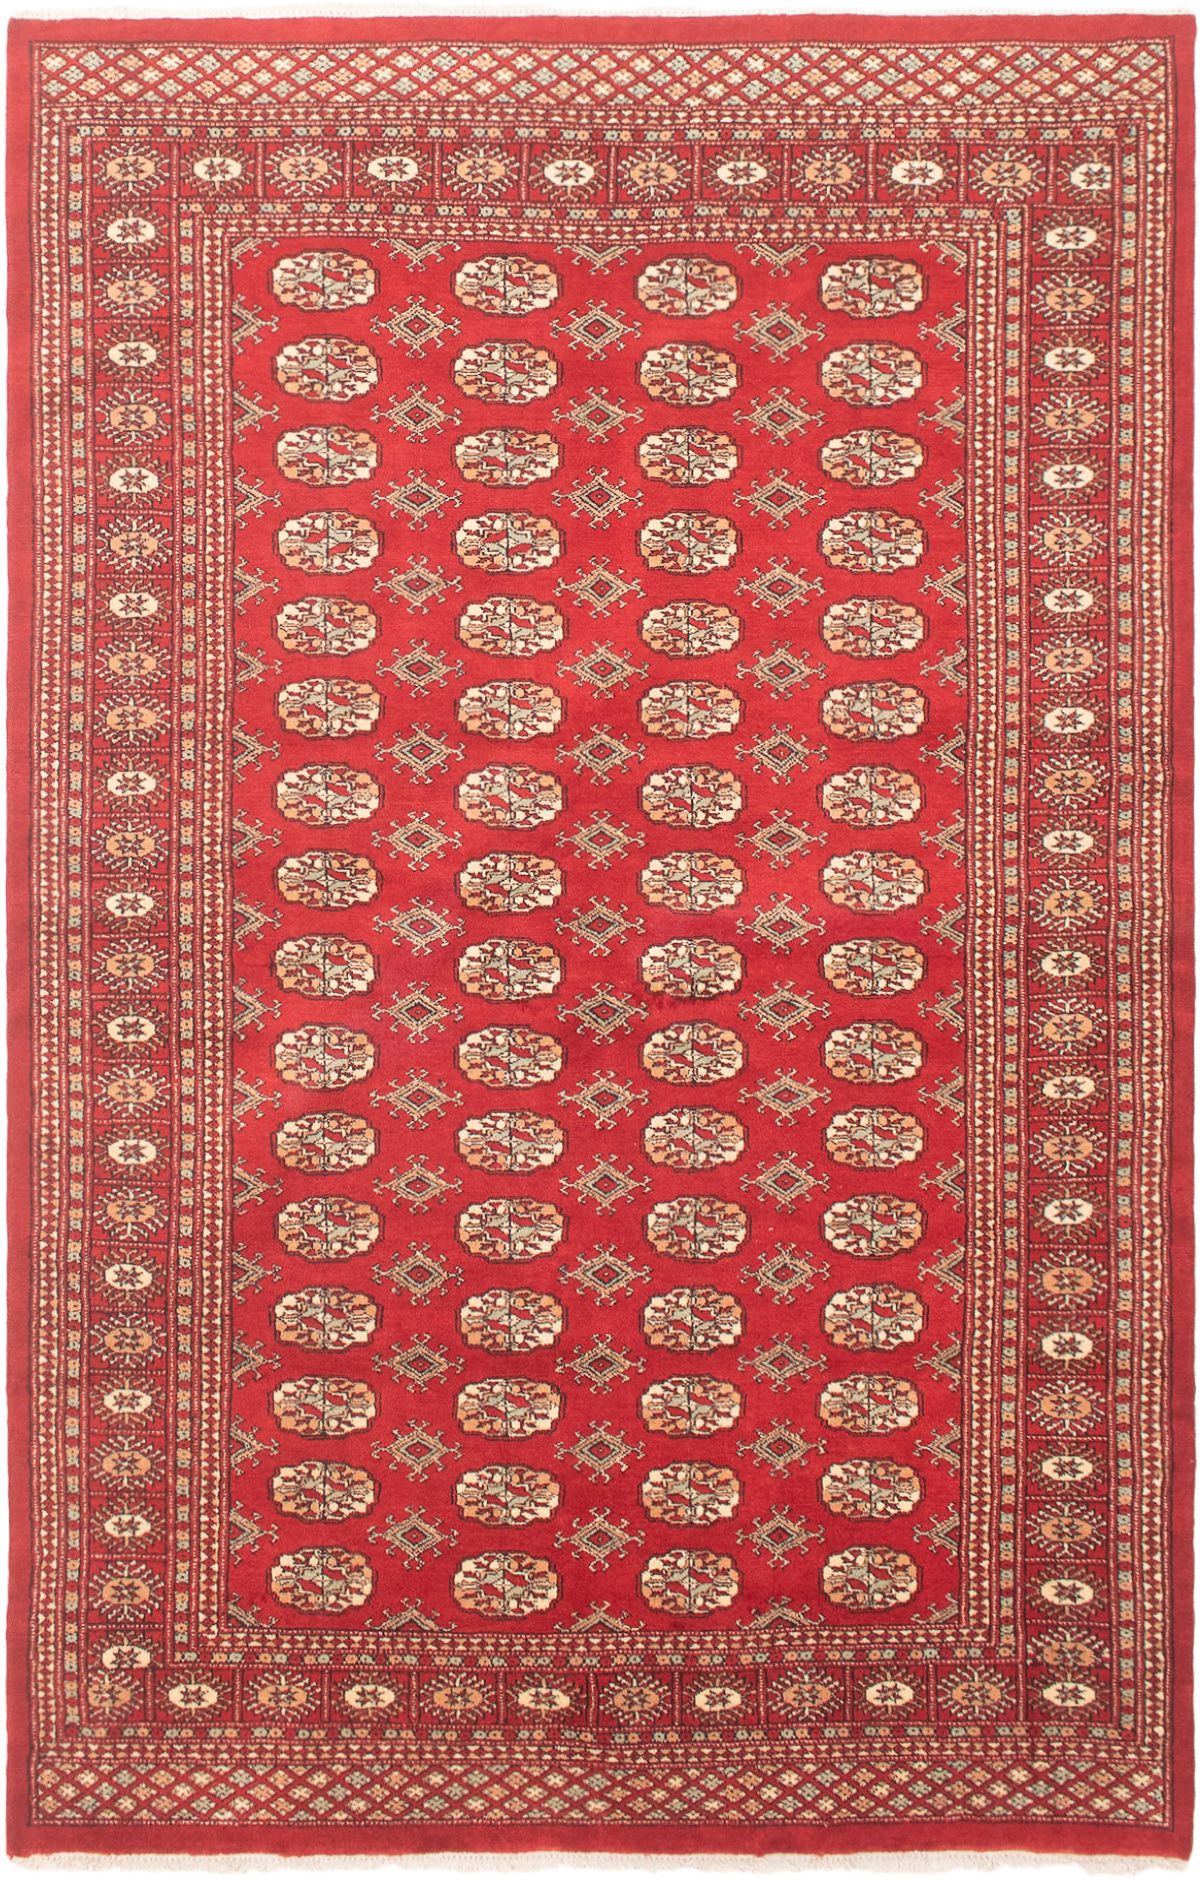 Hand-knotted Finest Peshawar Bokhara Red Wool Rug 4'11" x 7'9" Size: 4'11" x 7'9"  